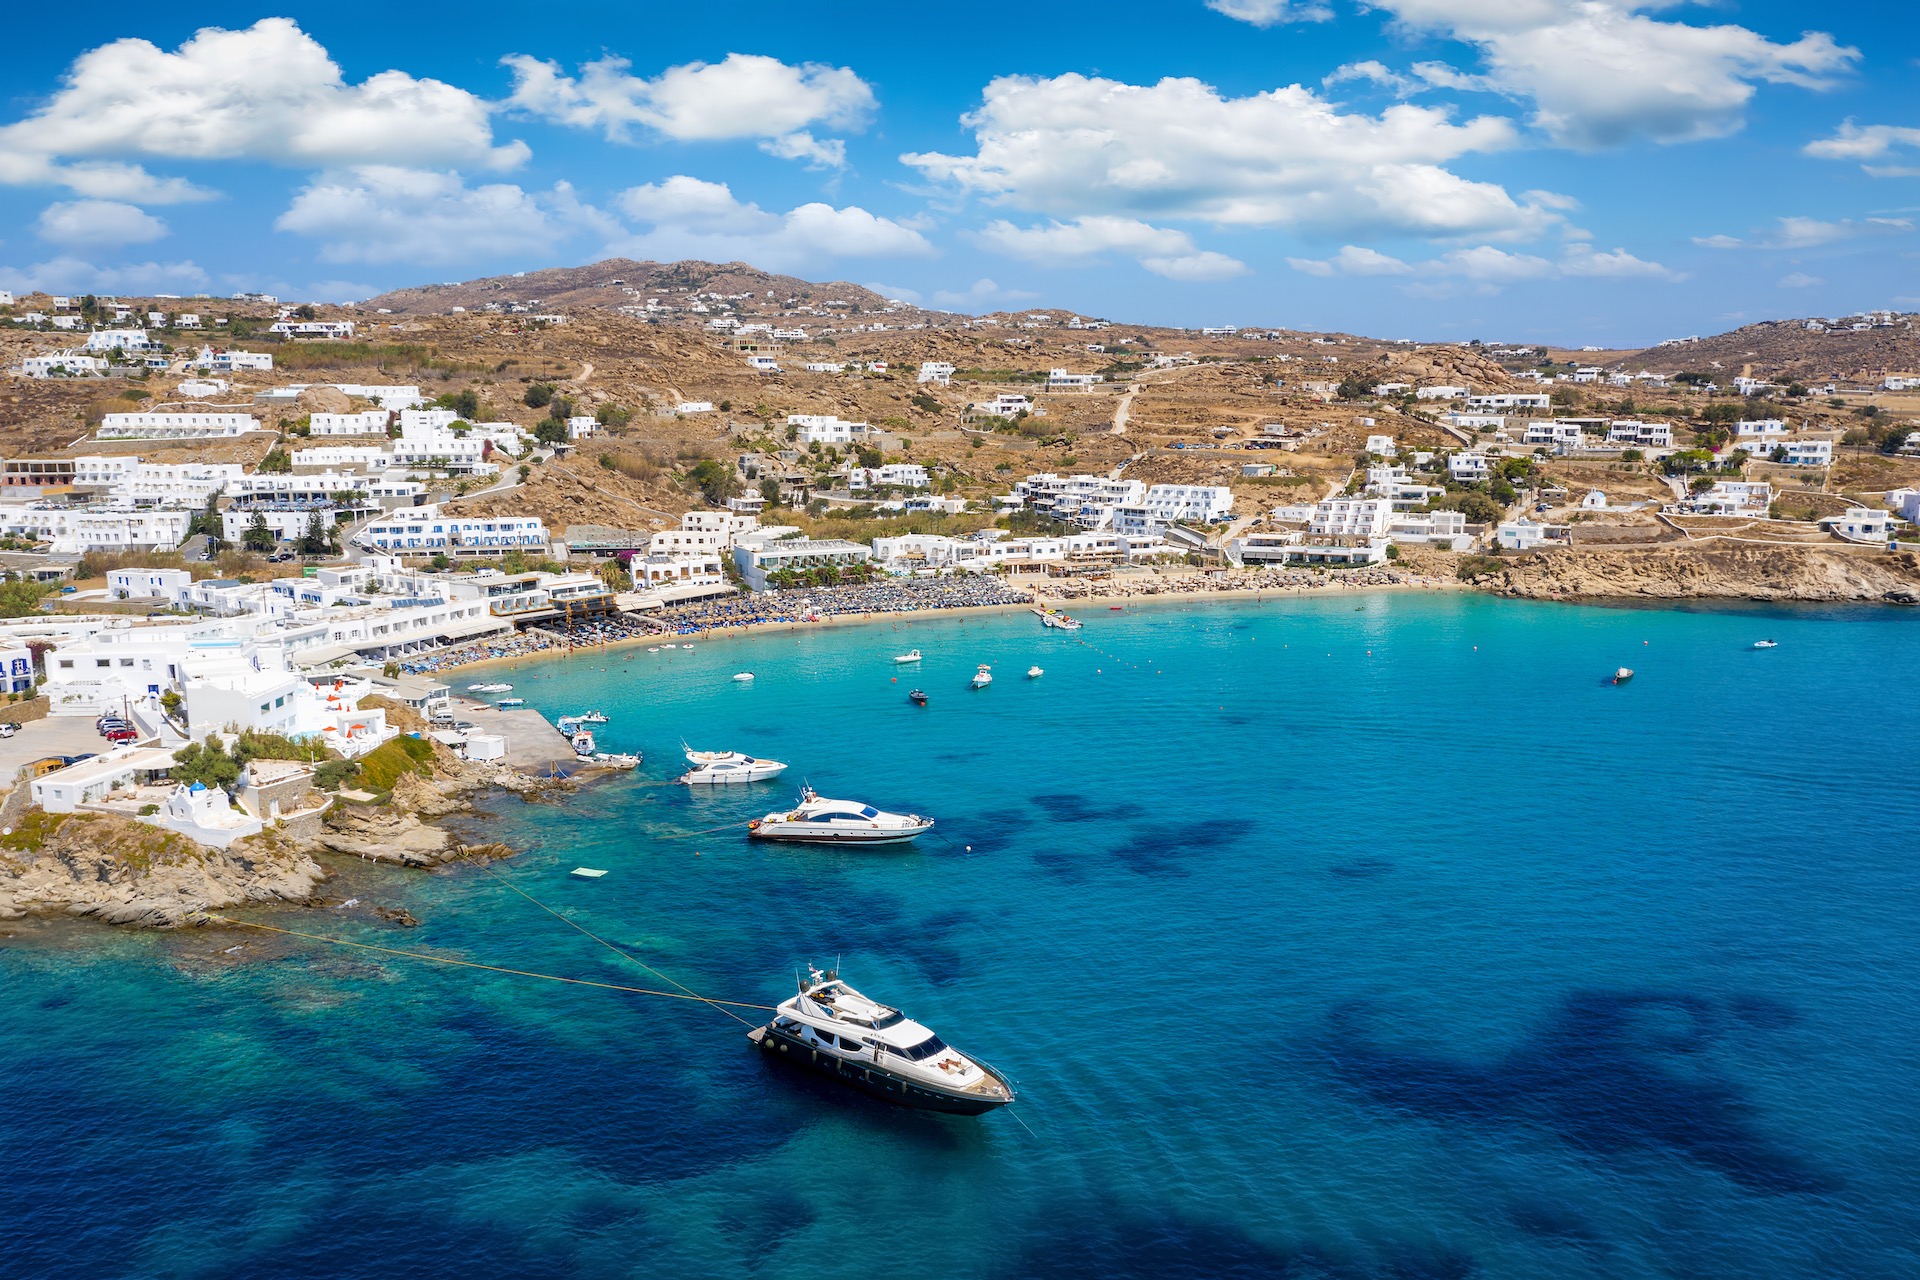 View of Mykonos from the air